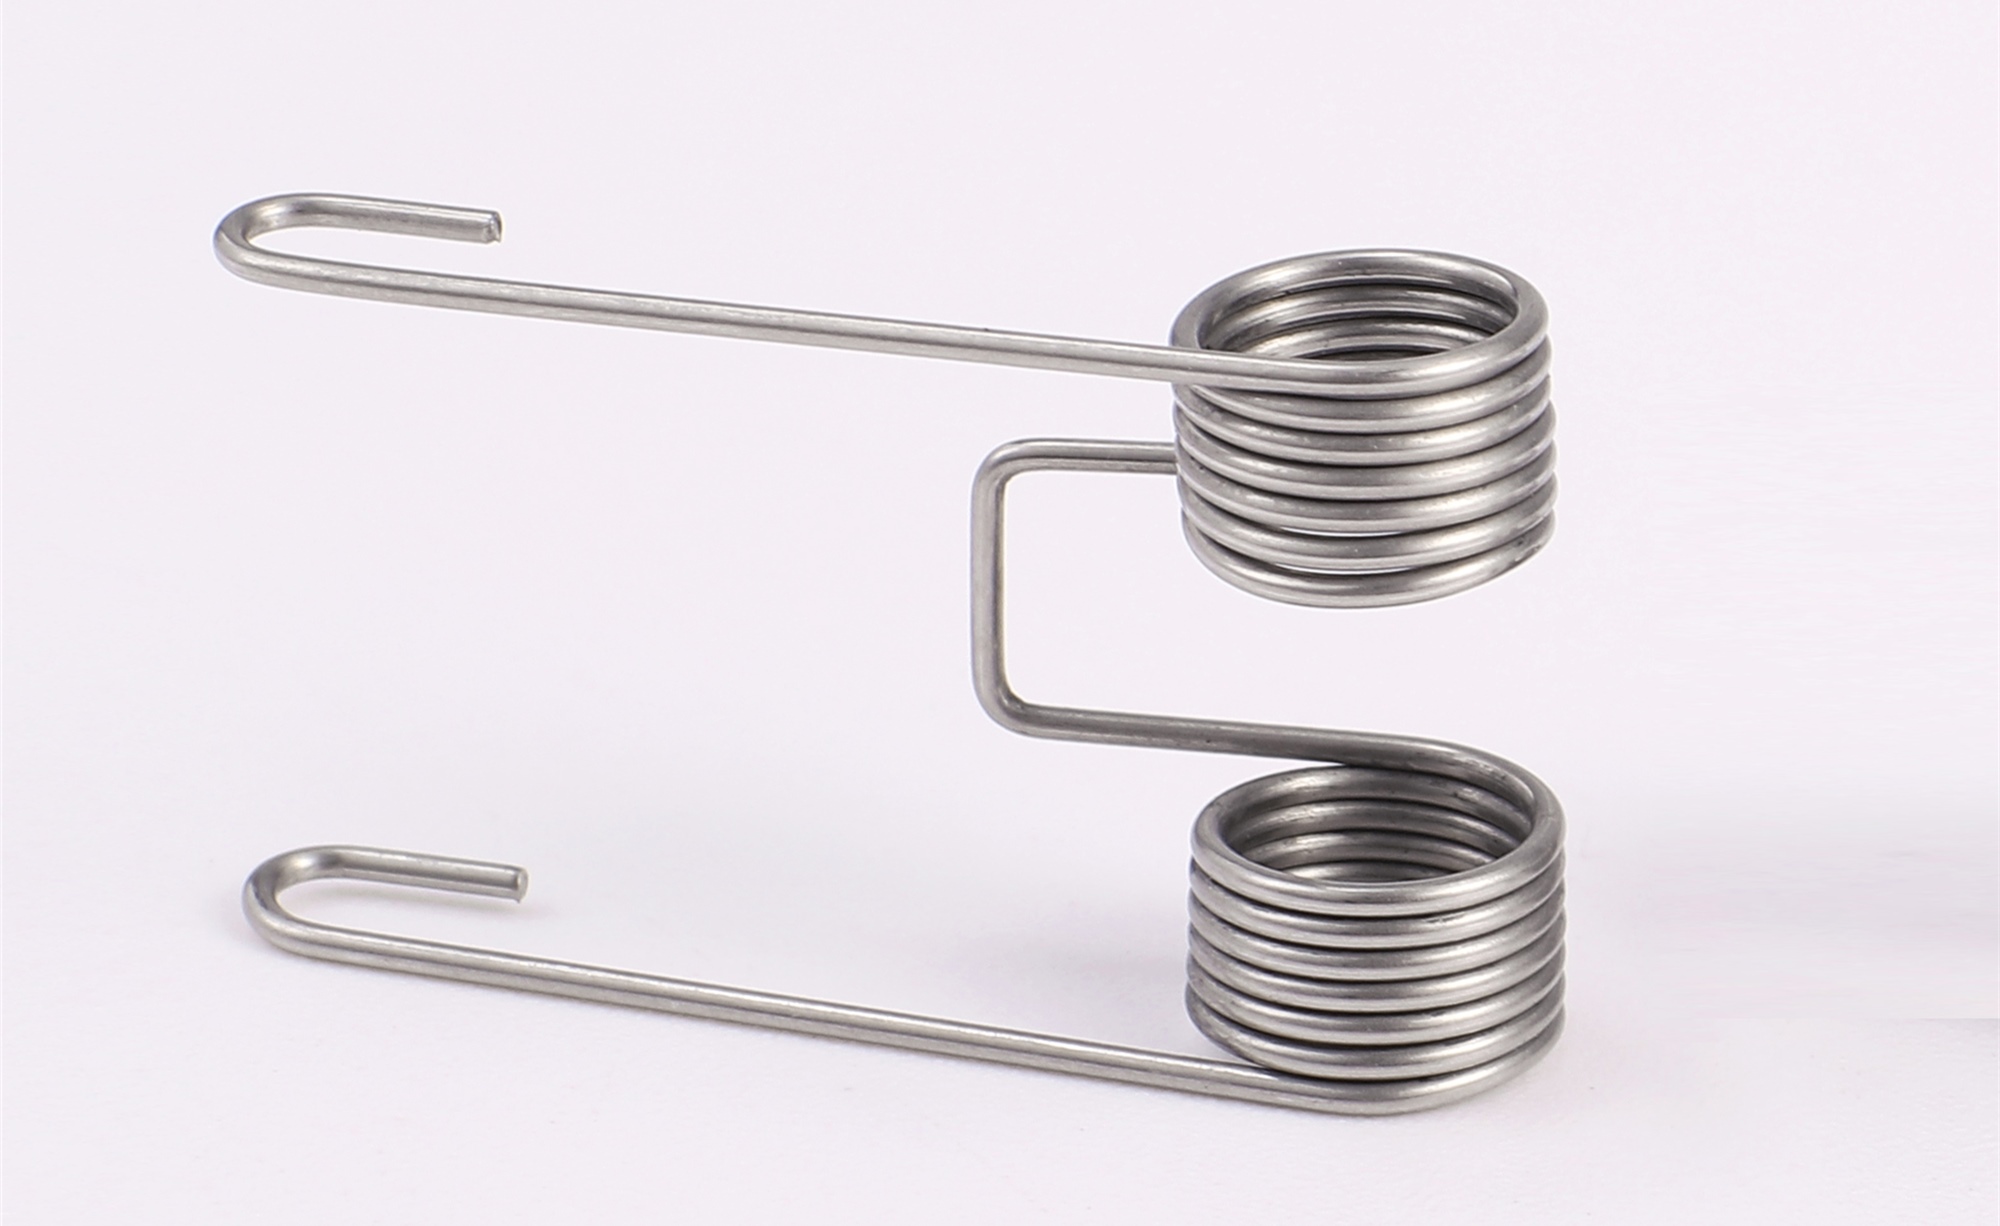 Coil extension, torsion spring manufacturing